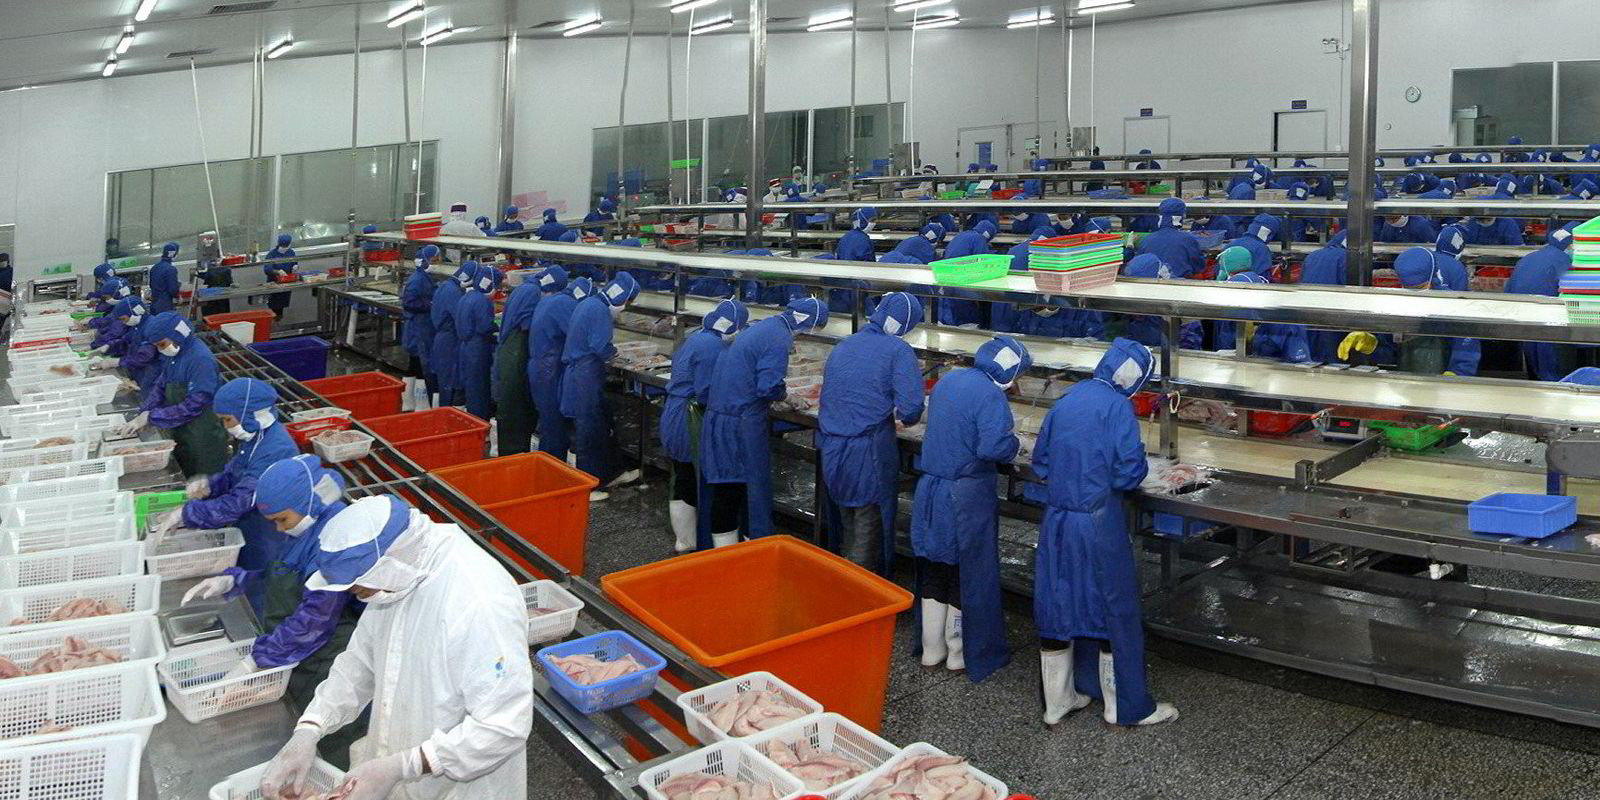 Chinese tilapia titan plows $37 million new seafood processing plant | IntraFish.com